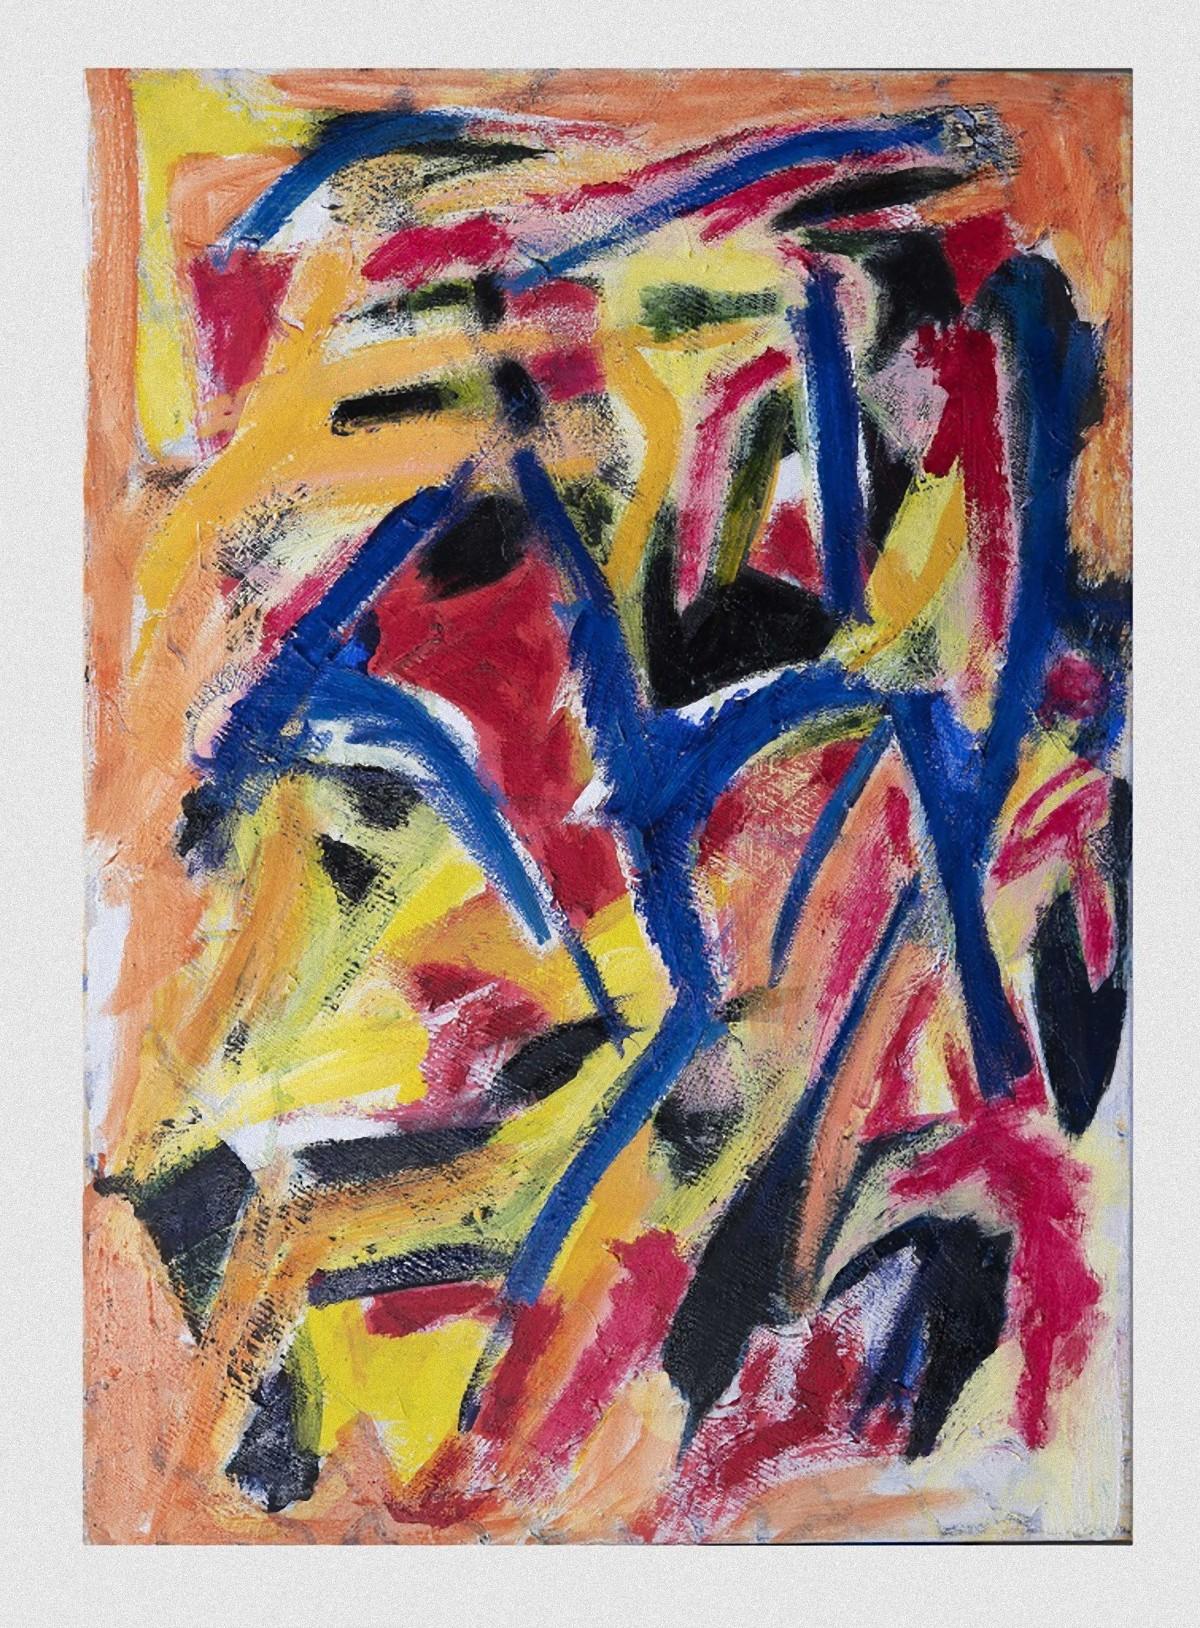 Abstract Colors is an artwork realized by Giorgio Lo Fermo (b. 1947) in 1983.

Original Oil On Canvas. 

Hand-signed and dated by the artist on the back of the canvas: Lo Fermo 83.

Mint conditions.

Giorgio Lo Fermo is an Italian painter and